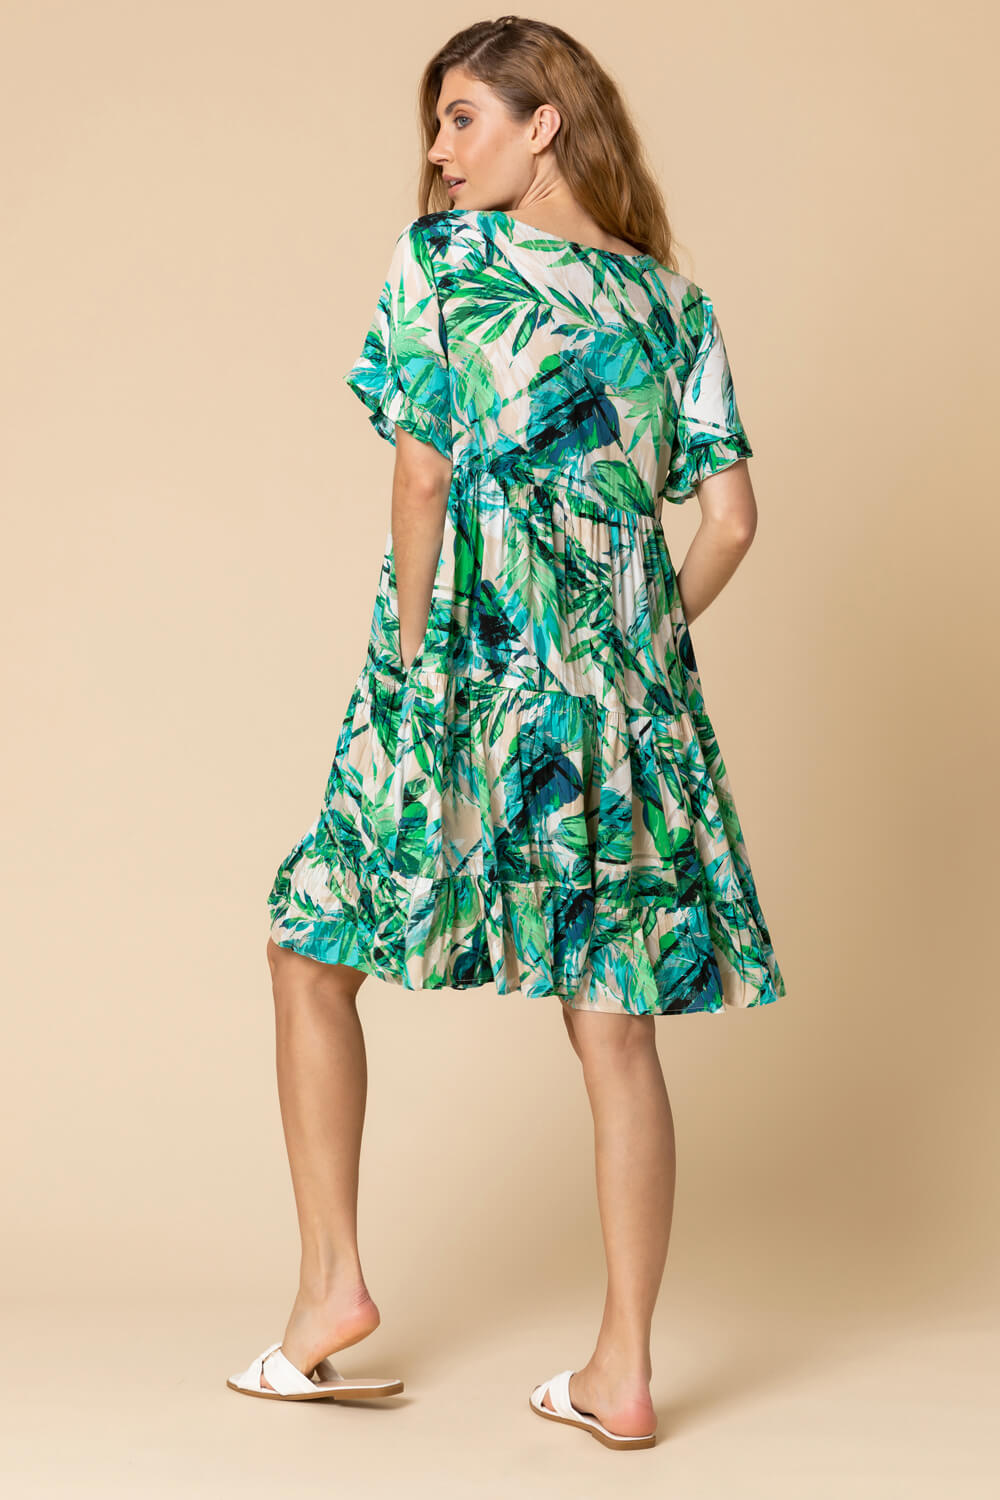 Green Tropical Print Tiered Pocket Dress, Image 3 of 5